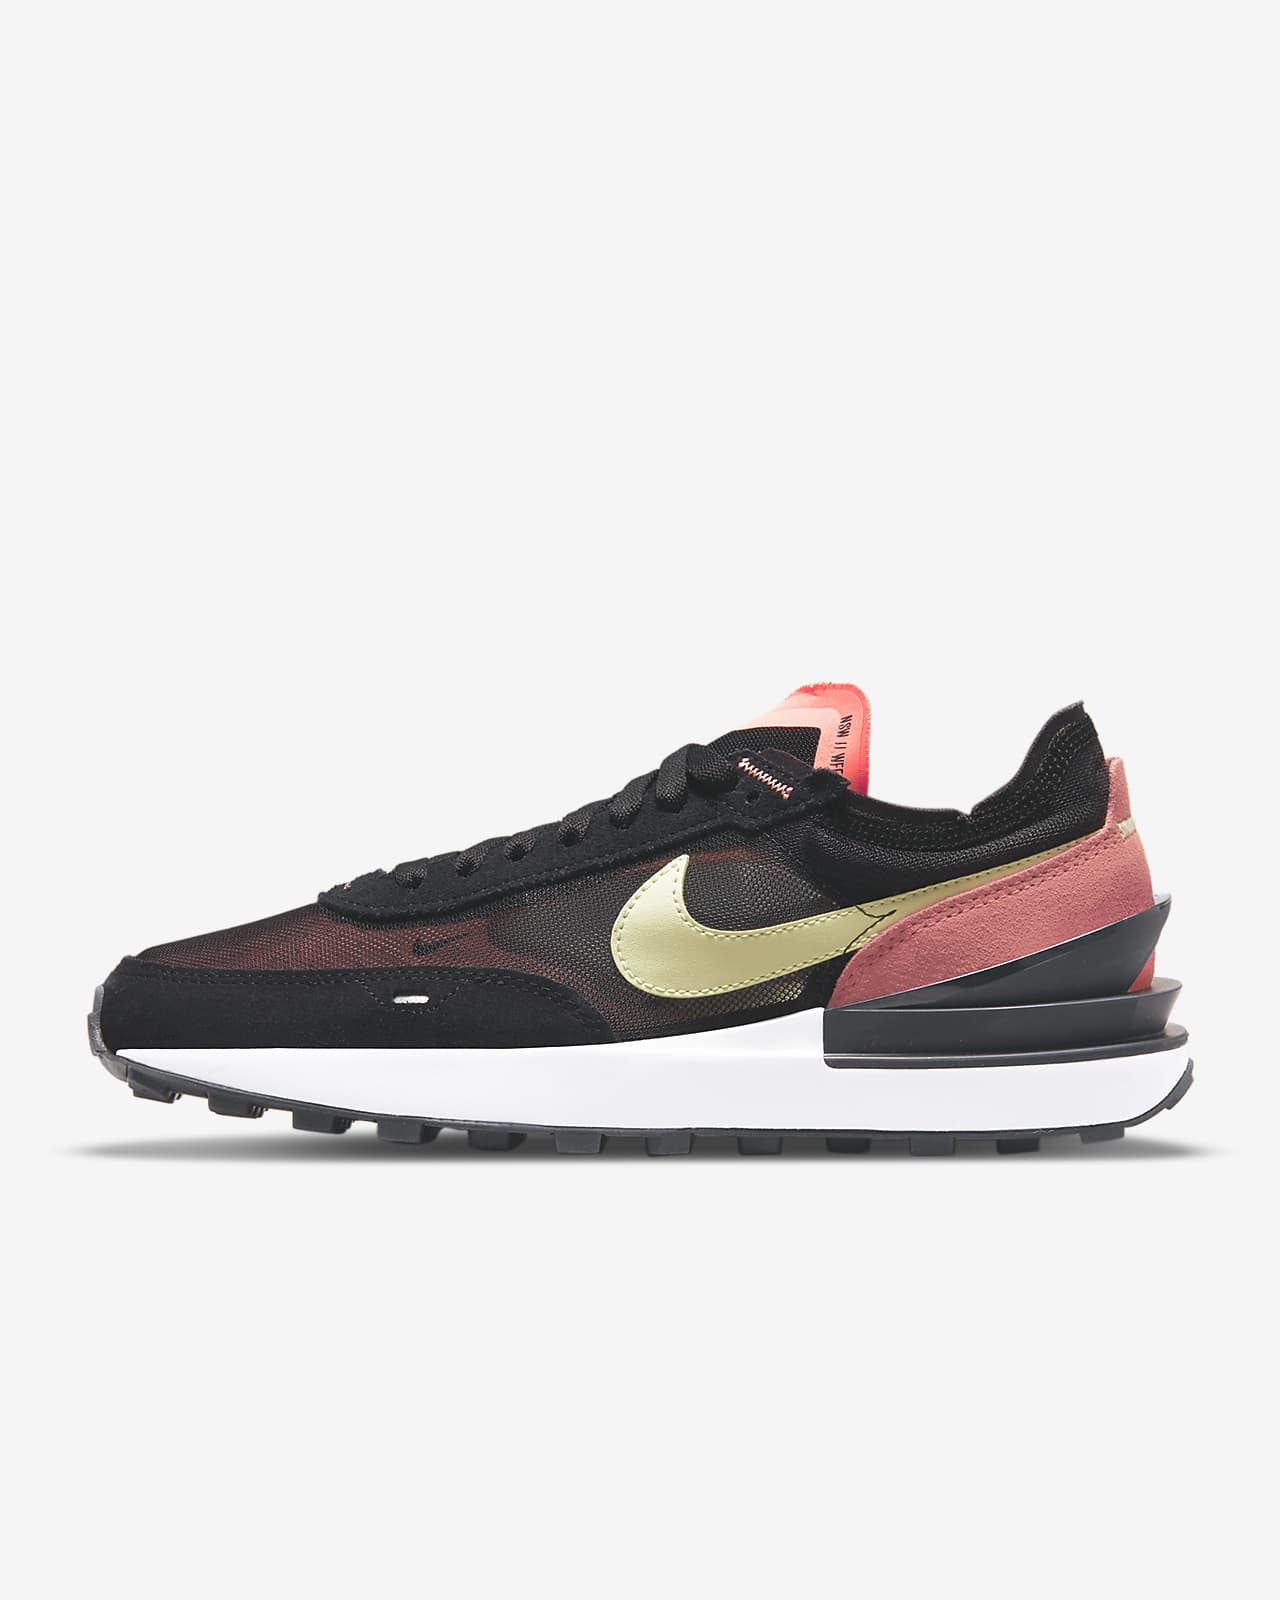 Chaussure Nike Waffle One pour Femme